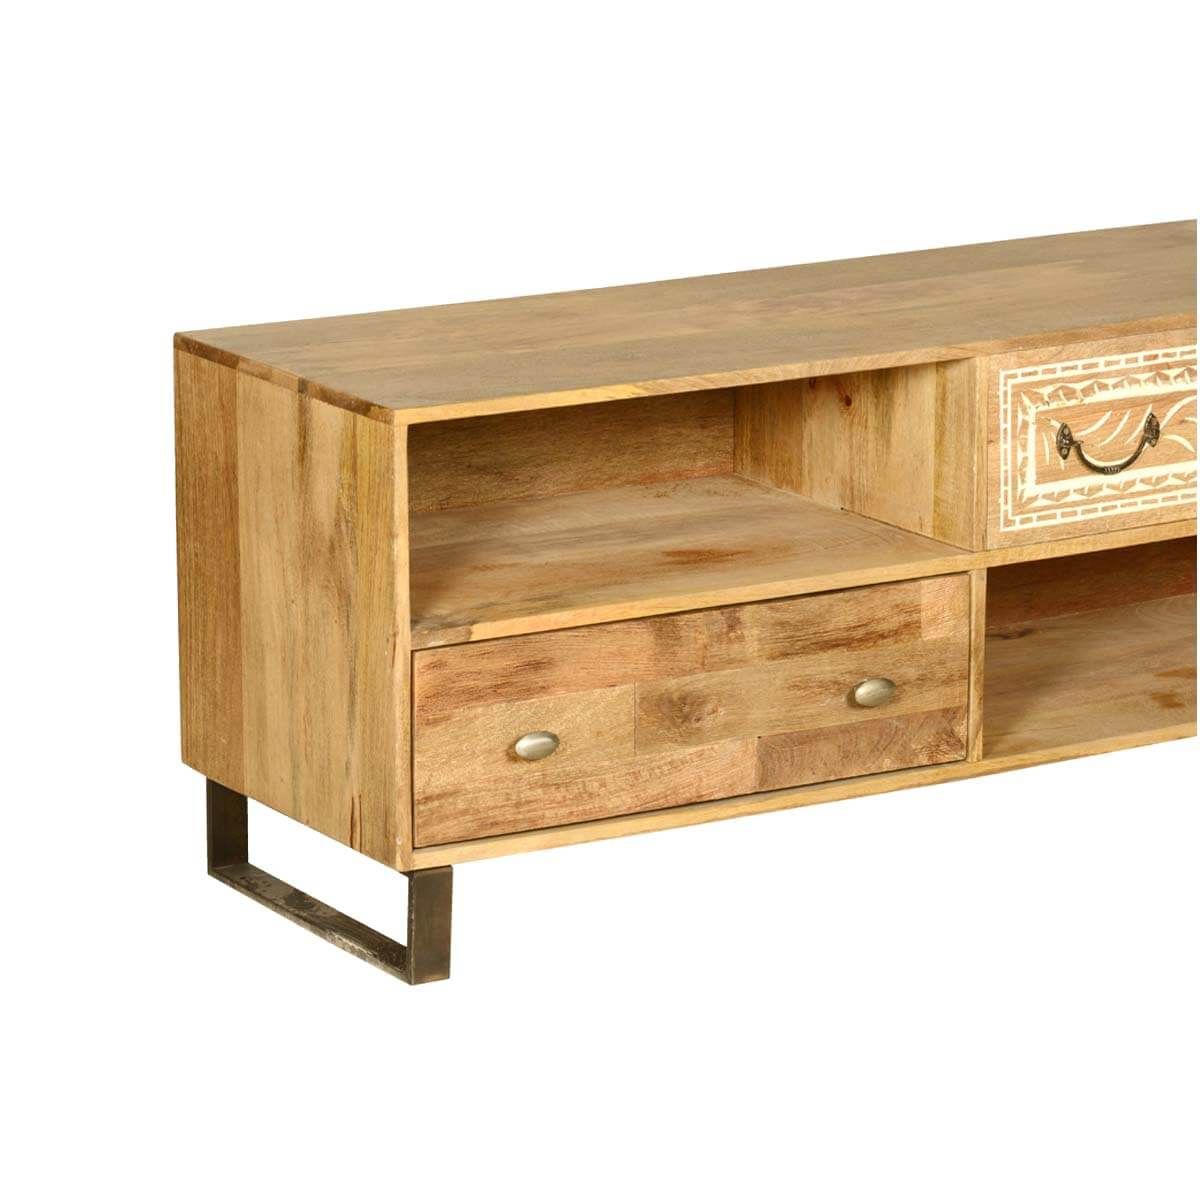 Modern Rustic Solid Wood Entertainment Center Tv Stand W 2 With Modern Wood Tv Stands (View 15 of 15)